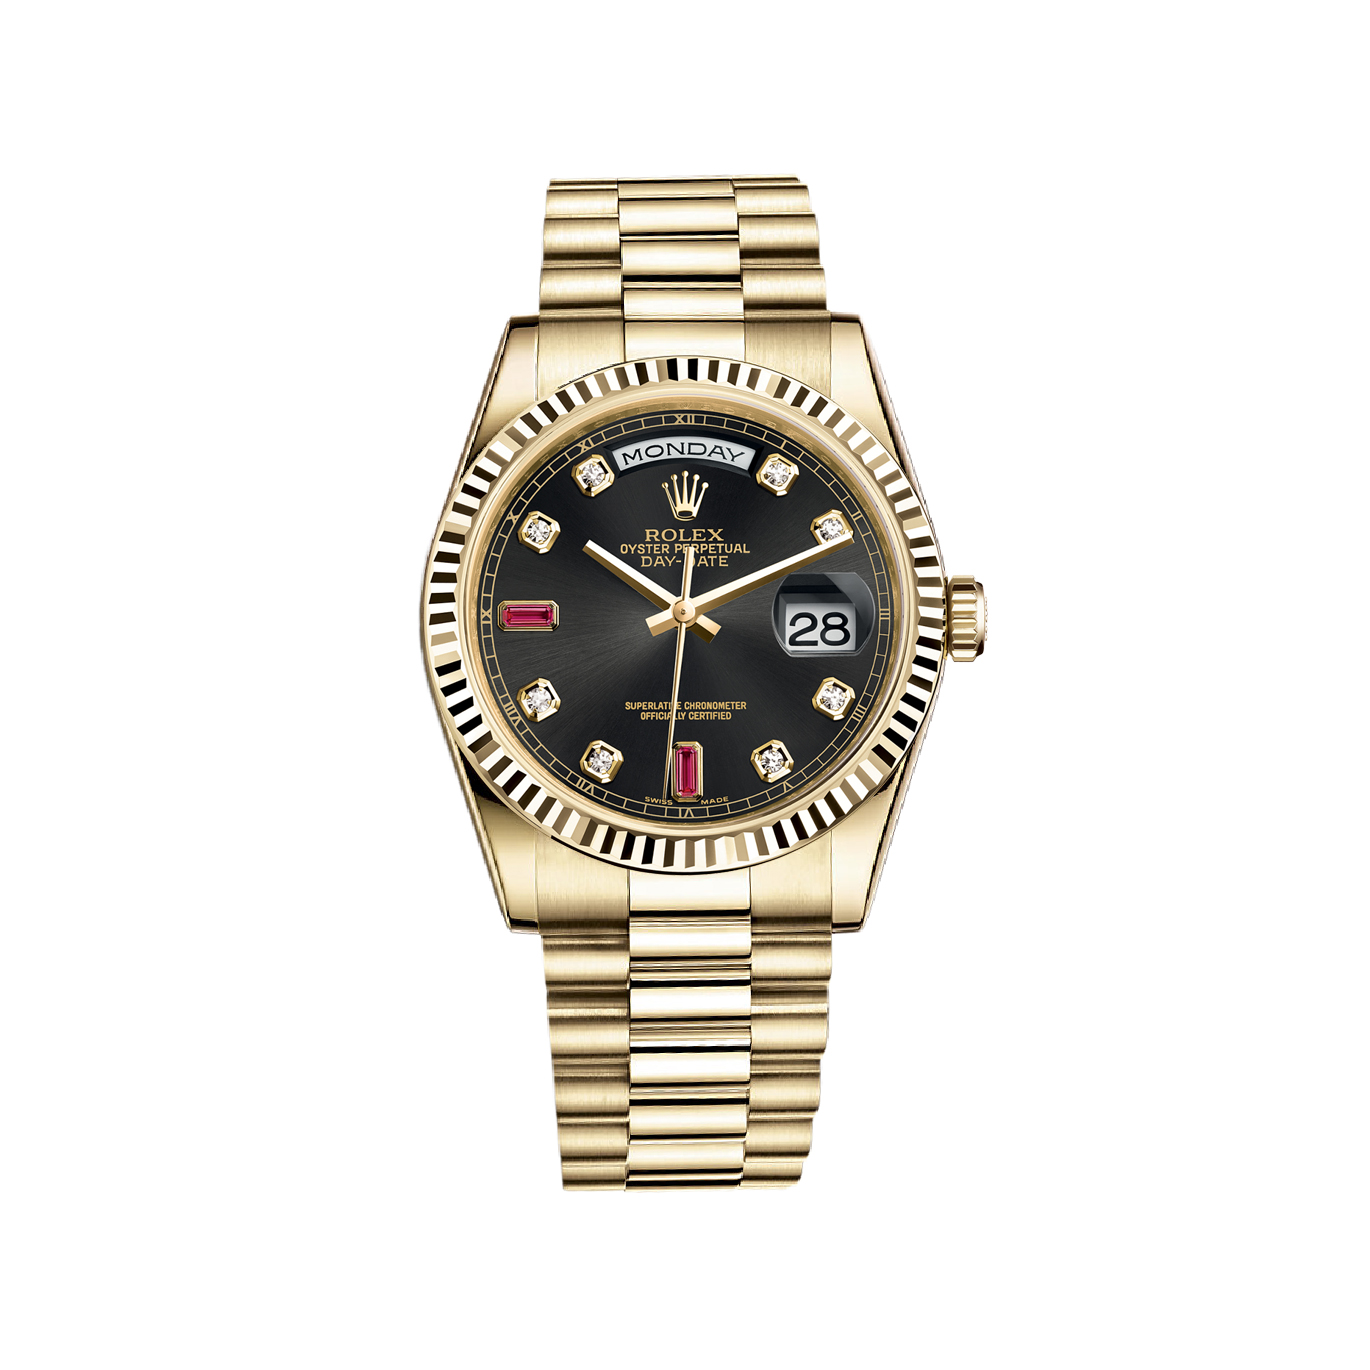 Day-Date 36 118238 Gold Watch (Black Set with Diamonds And Rubies)